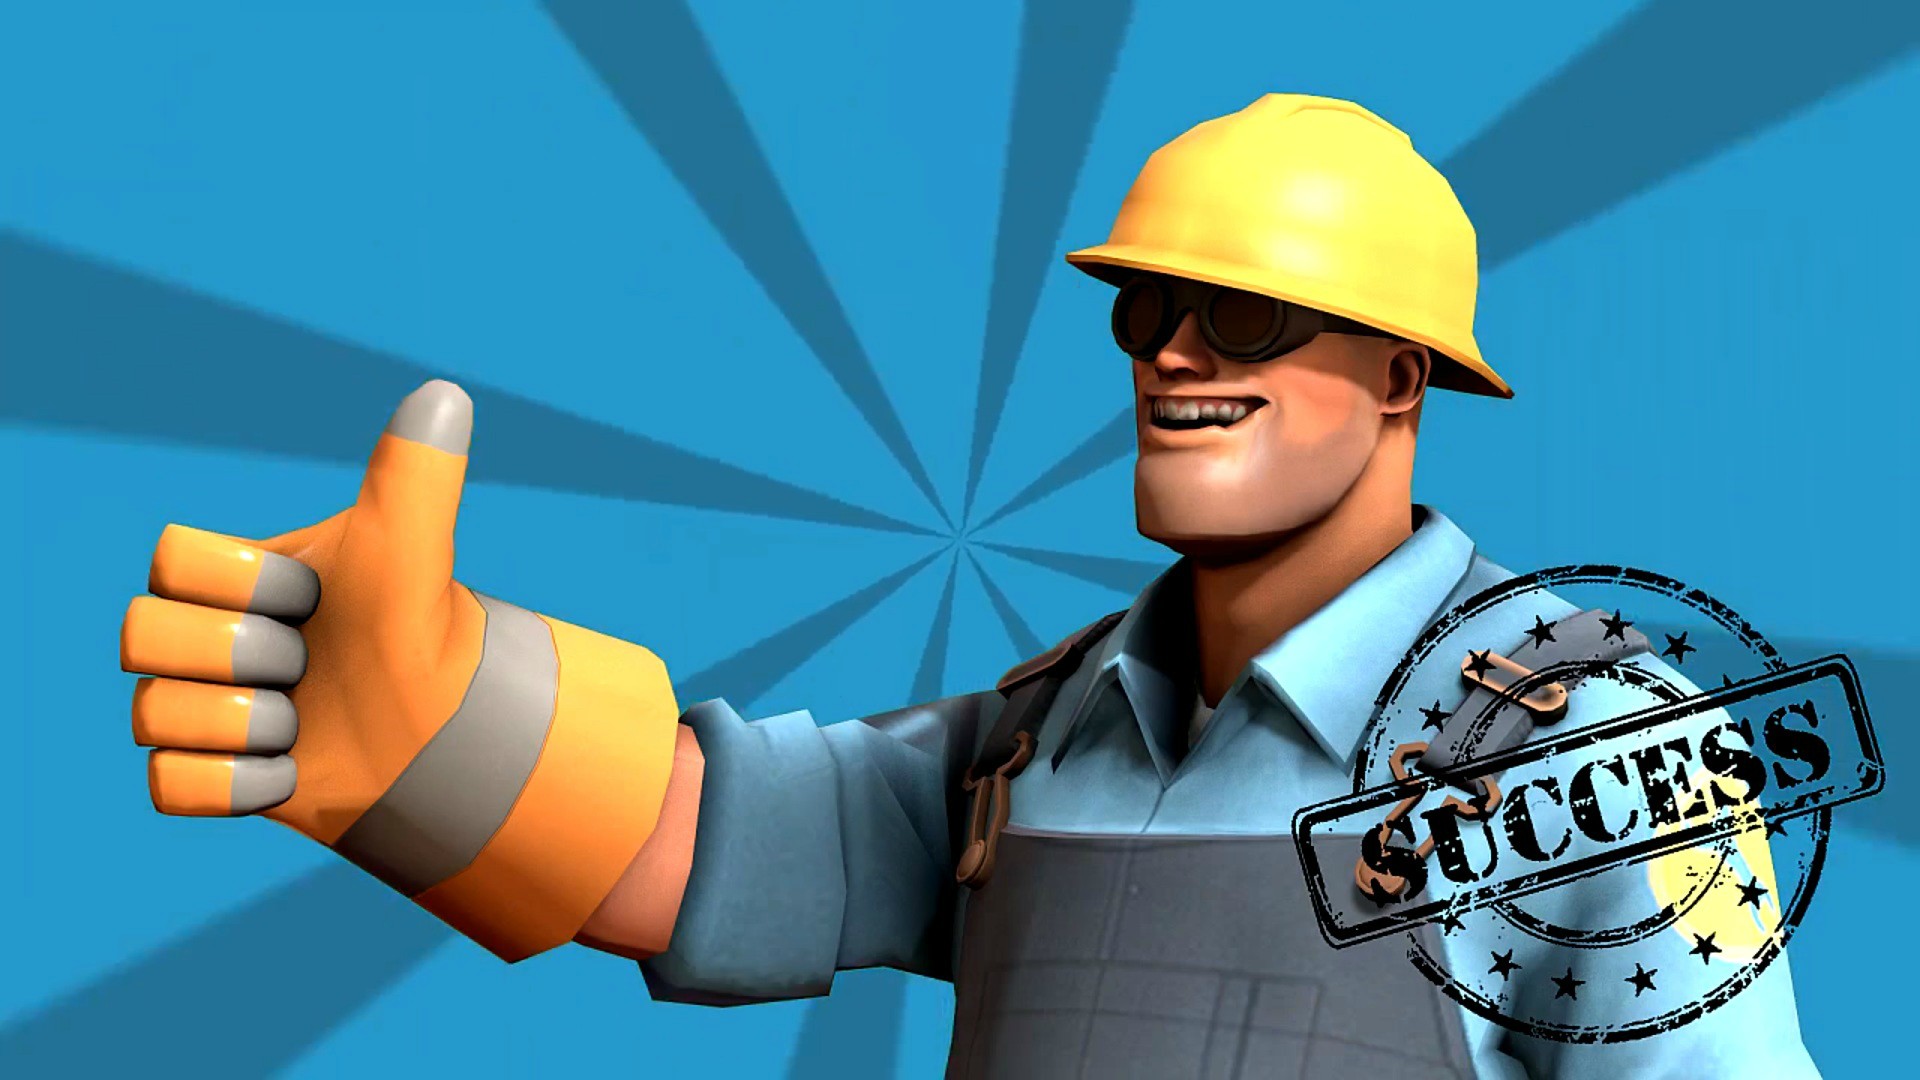 In This Post You Will See Our Favourite Team Fortress Wallpaper